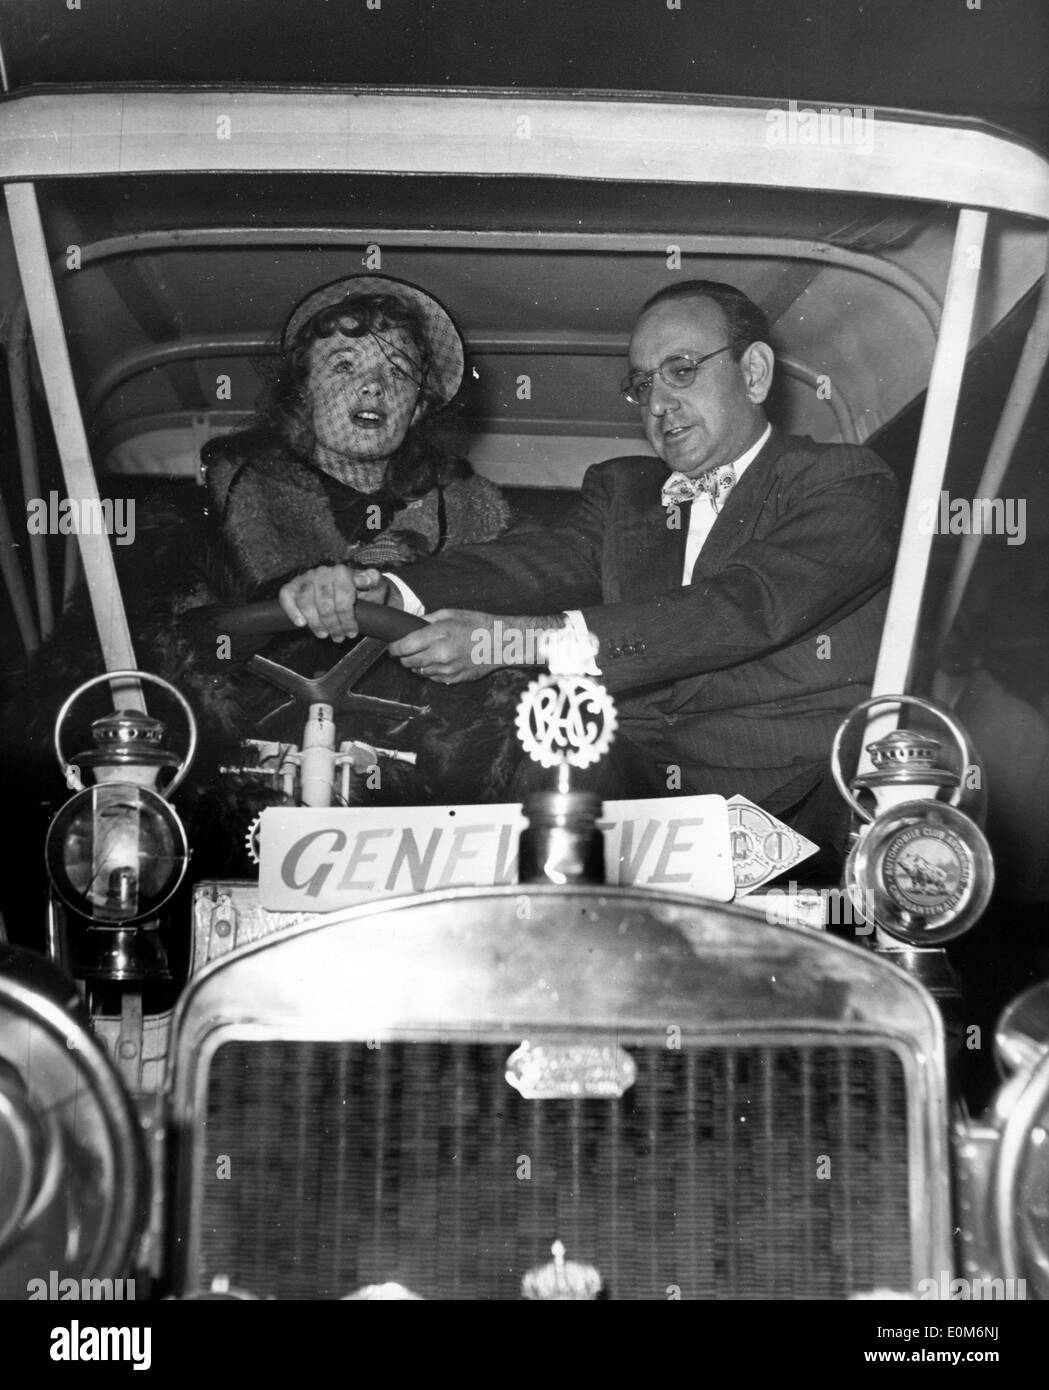 Oct 30, 1953 - London, England, UK - (File Photo, location unknown) HENRY CORNELIUS was a South African who worked as a director, editor, producer, writer of films in Britain. PICTURED: HENRY CORNELIUS, right, with French actress ETCHIKA CHOUREAU, in the taxicab used in his film 'Genevieve'. Stock Photo